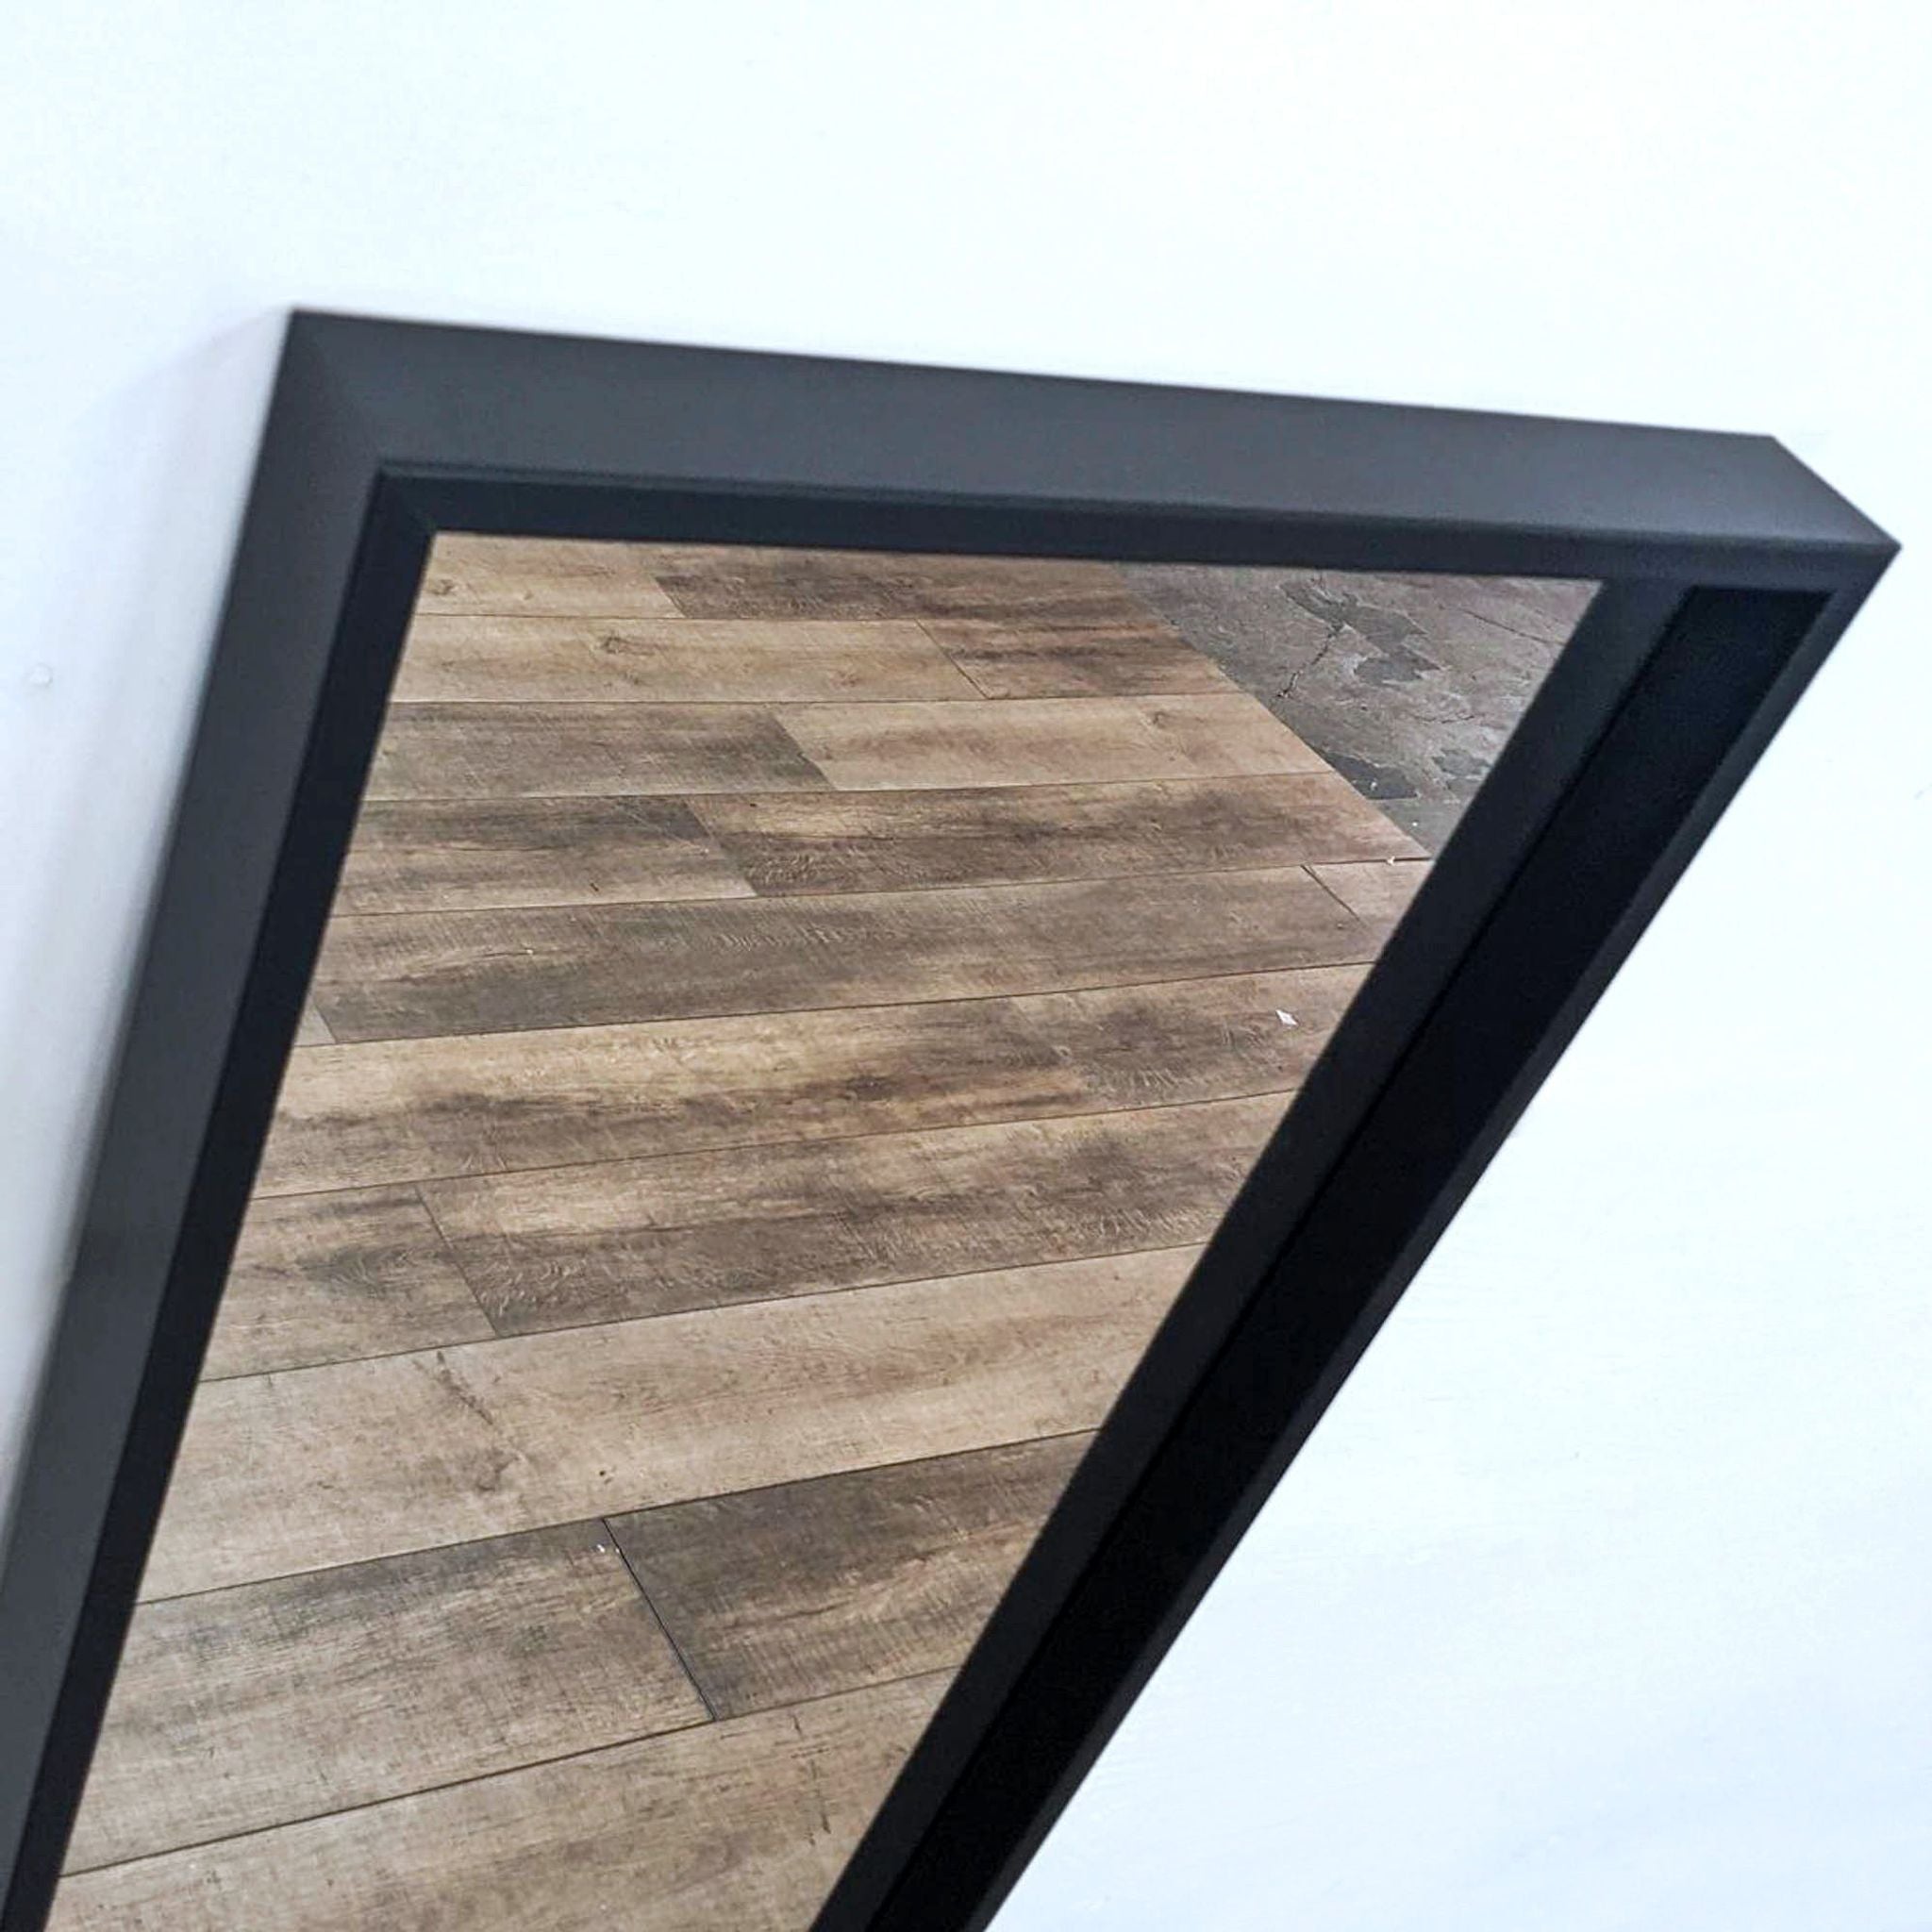 Close-up of Ikea Nissdal mirror's corner showing the black frame's texture and angled view of the wooden floor reflection.